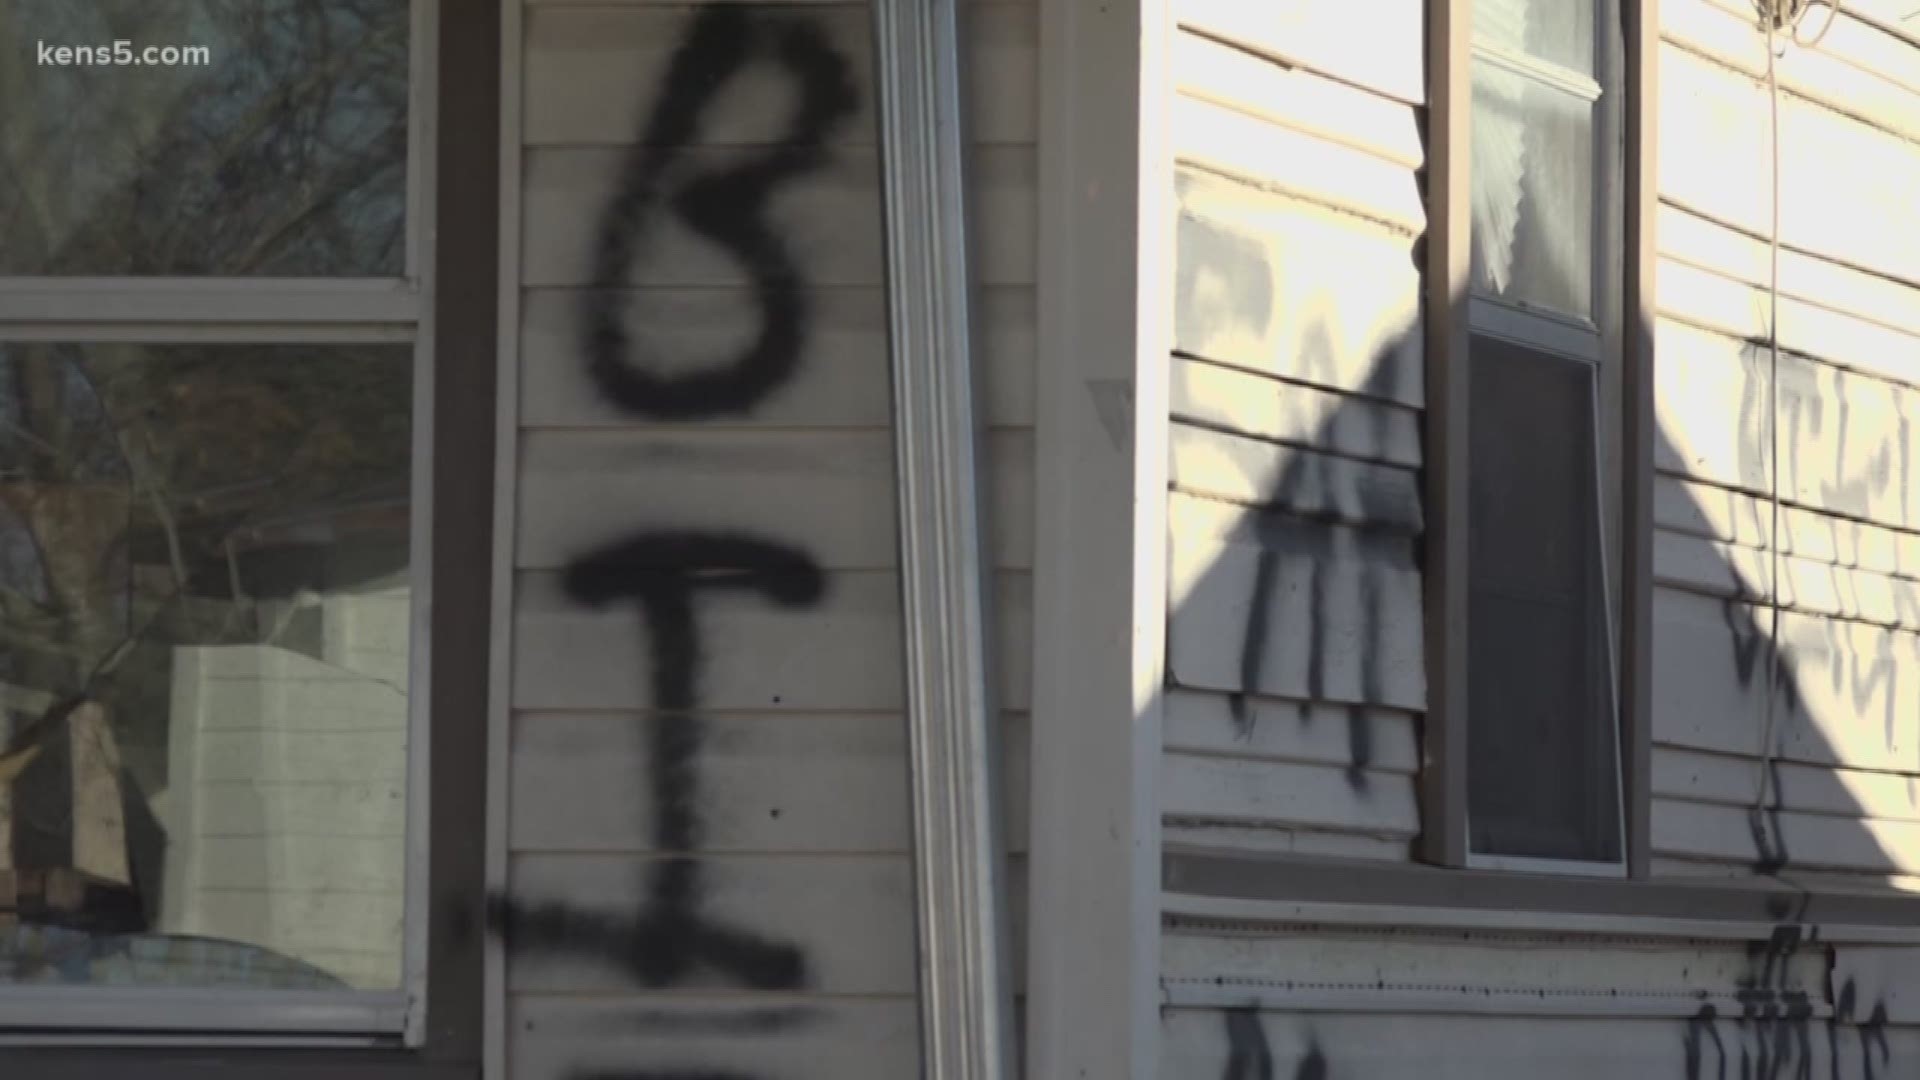 Obscene symbols and hateful words fill the walls outside a San Antonio home. The messages are directed at the registered sex offender who lives in the house.